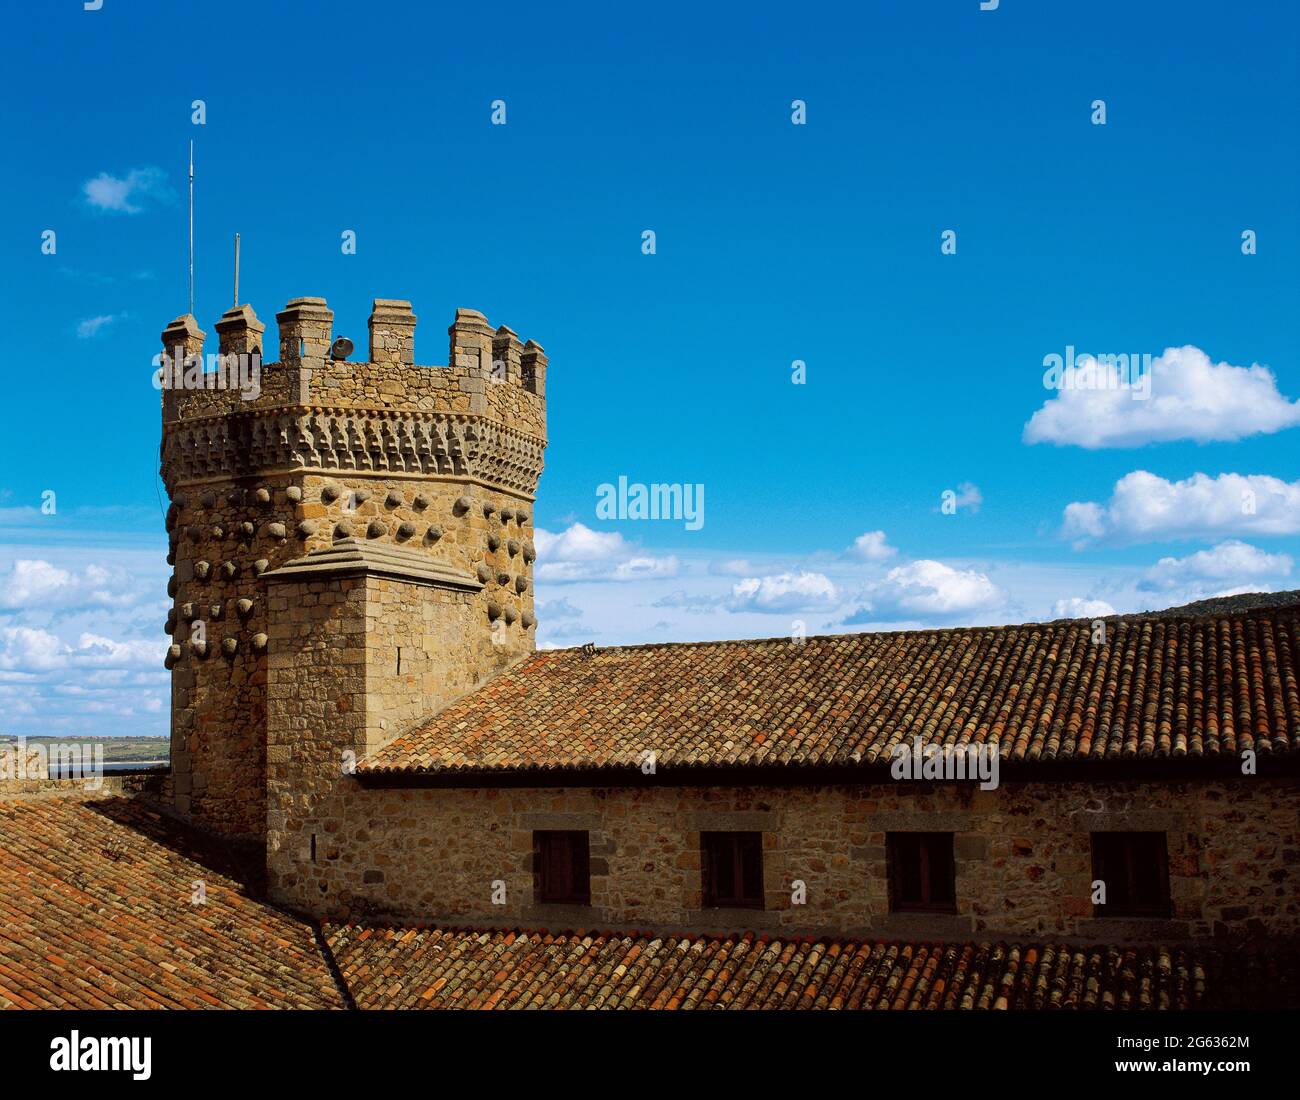 Spain, Community of Madrid, Manzanares El Real Castle. Built in 1475 by order of Diego Hurtado de Mendoza, was the residence of the Mendoza family until late 16th century. View of the Homage Tower, decorated with balls and framed in limestone rhombuses in the Elizabethan style. Stock Photo